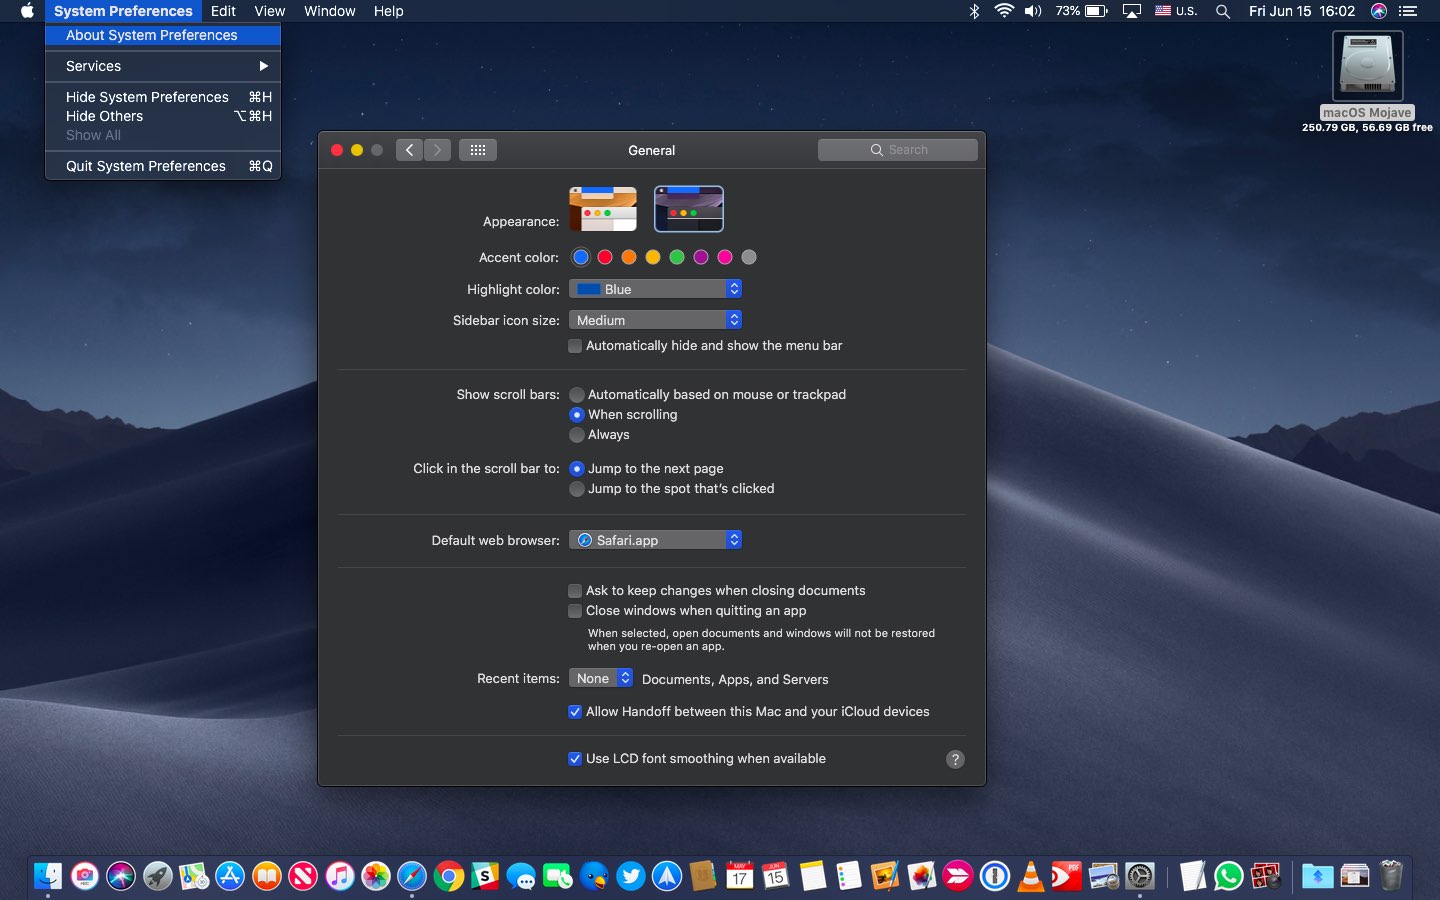 macOS Mojave Dark Mode with the blue accent and highlight color